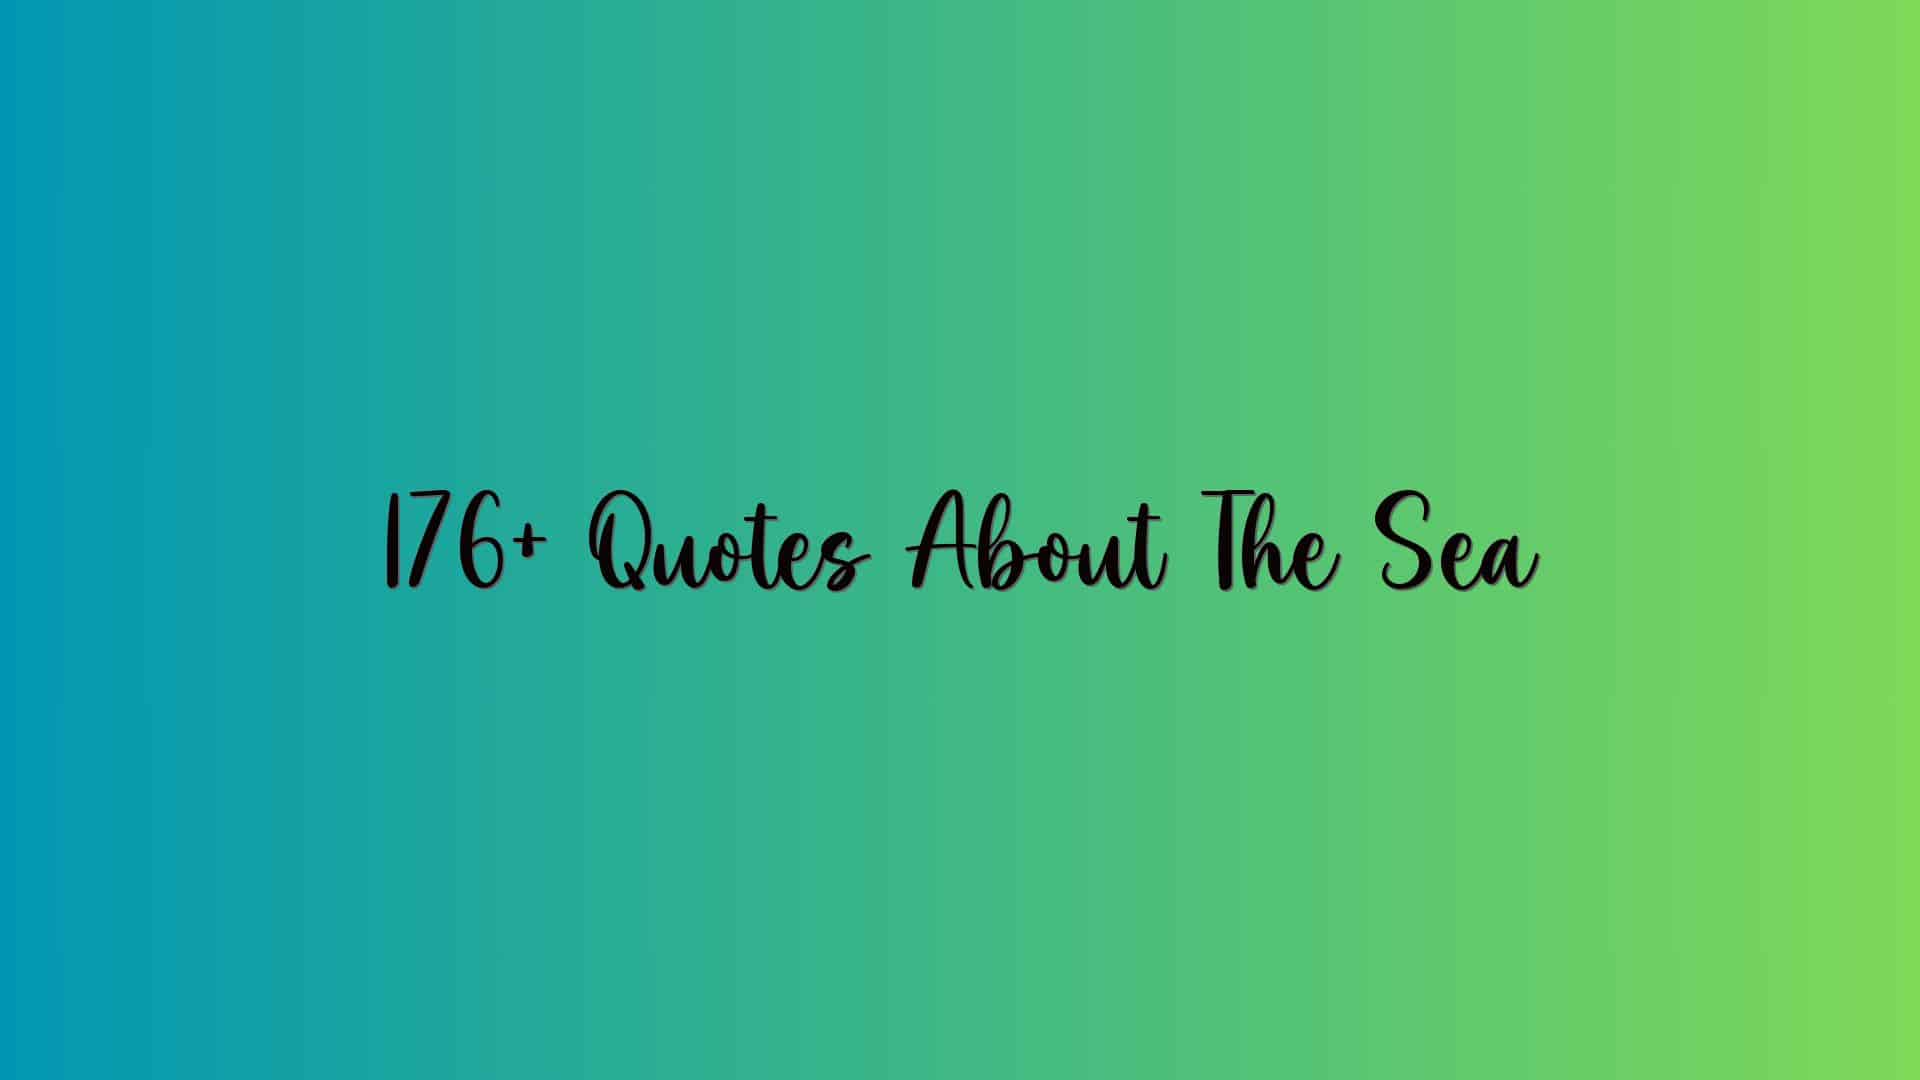 176+ Quotes About The Sea